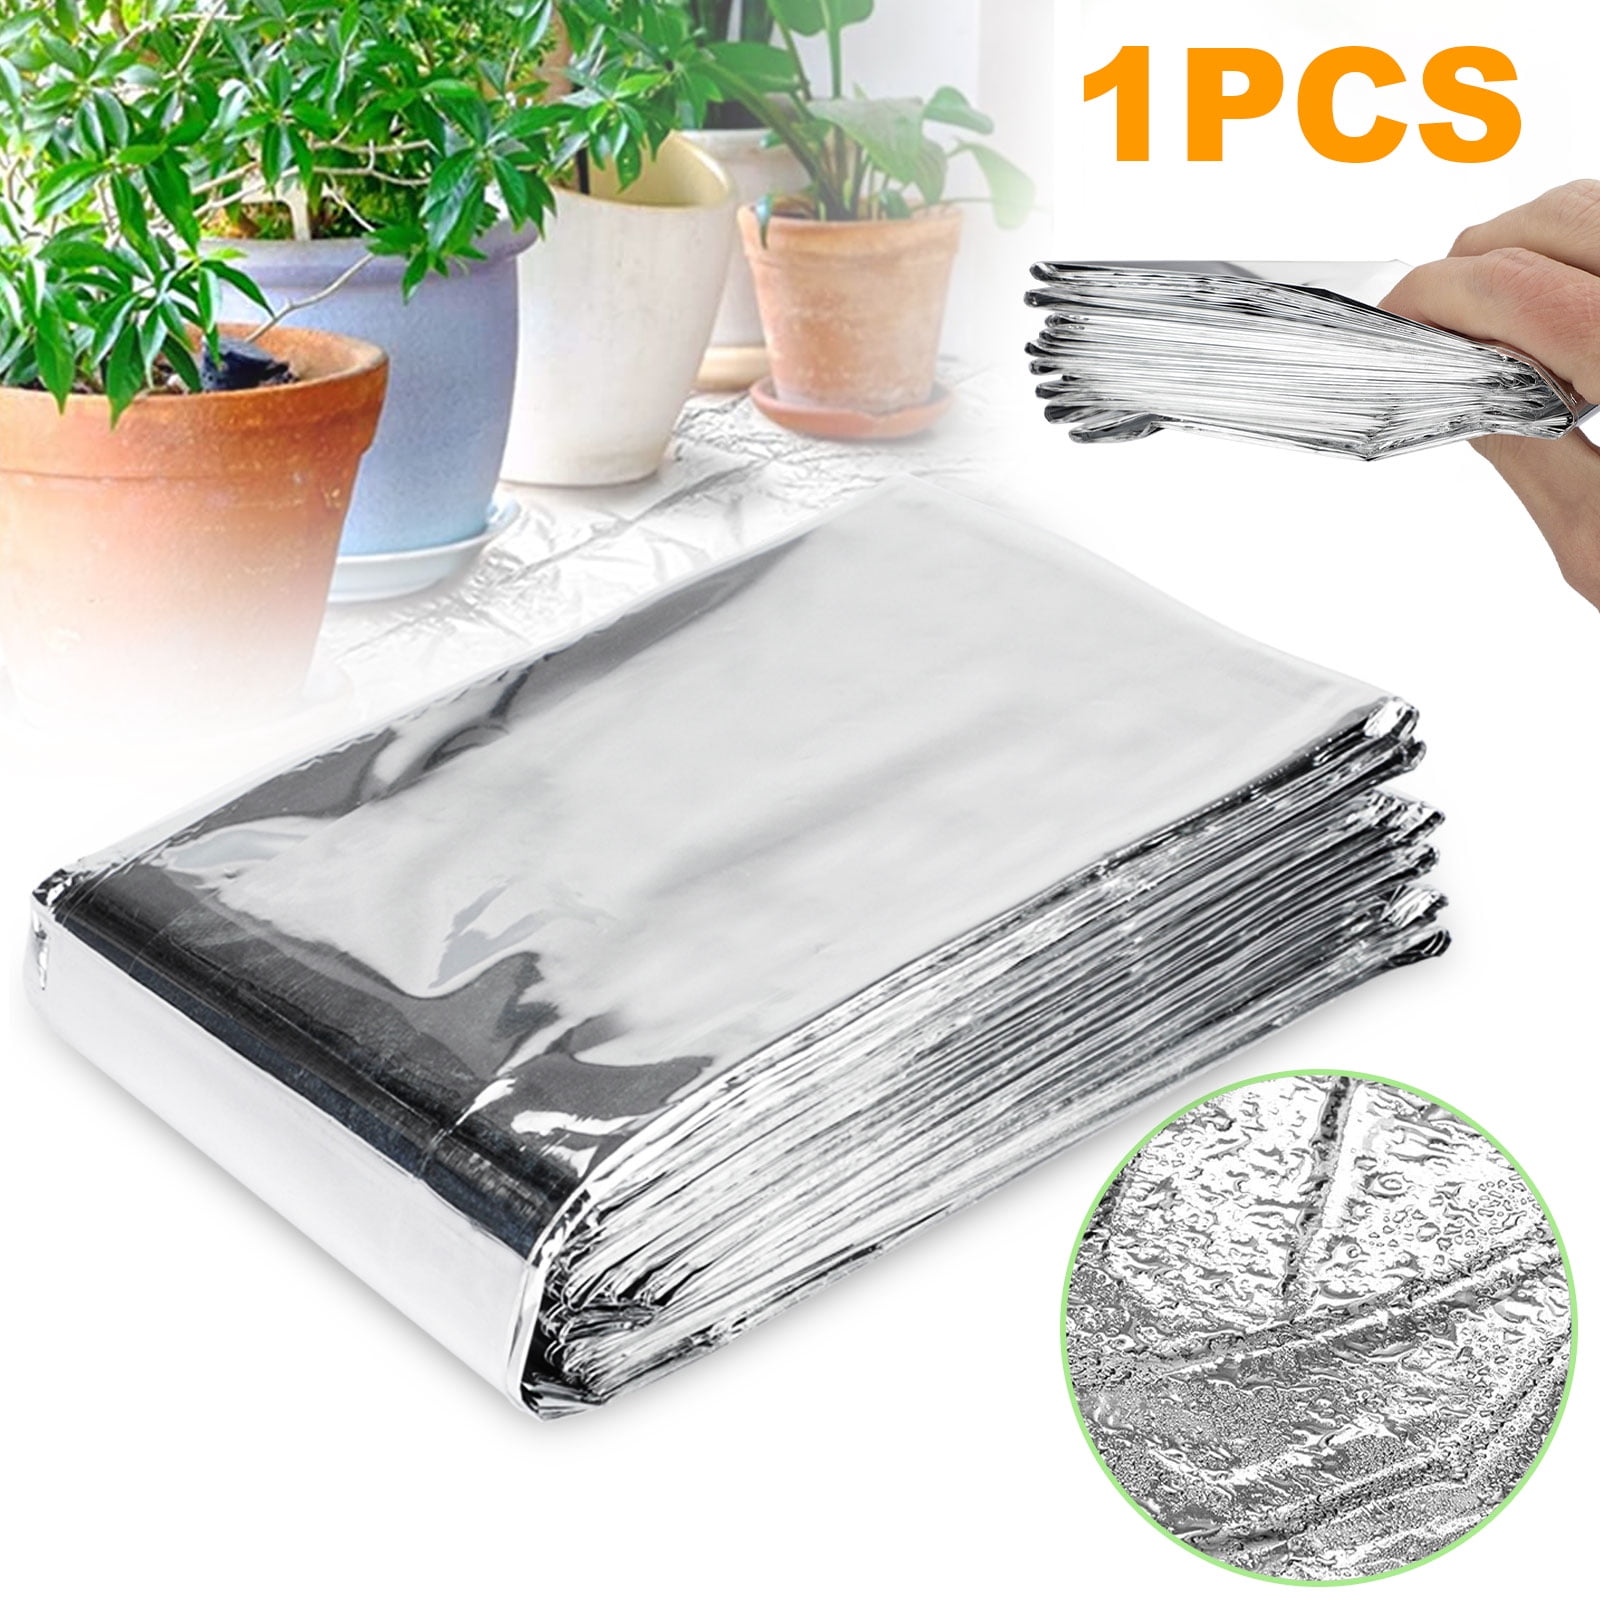 82 x 51 Inch Garden Greenhouse Covering Foil Sheets for Fruit Trees Plant Growth LTKJ 2 Pack Silver Reflective Mylar Film 